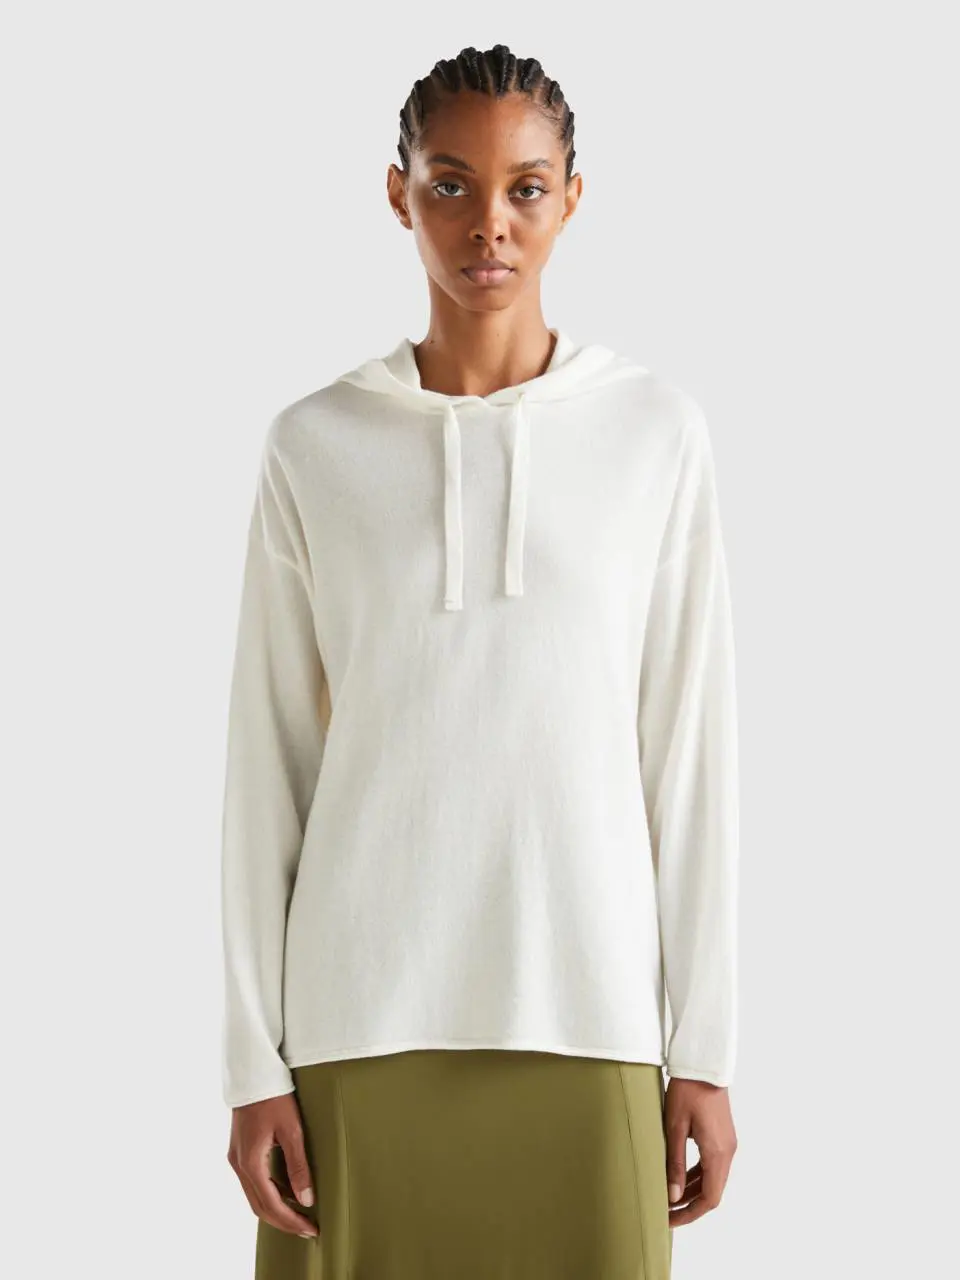 Benetton cream white cashmere blend sweater with hood. 1